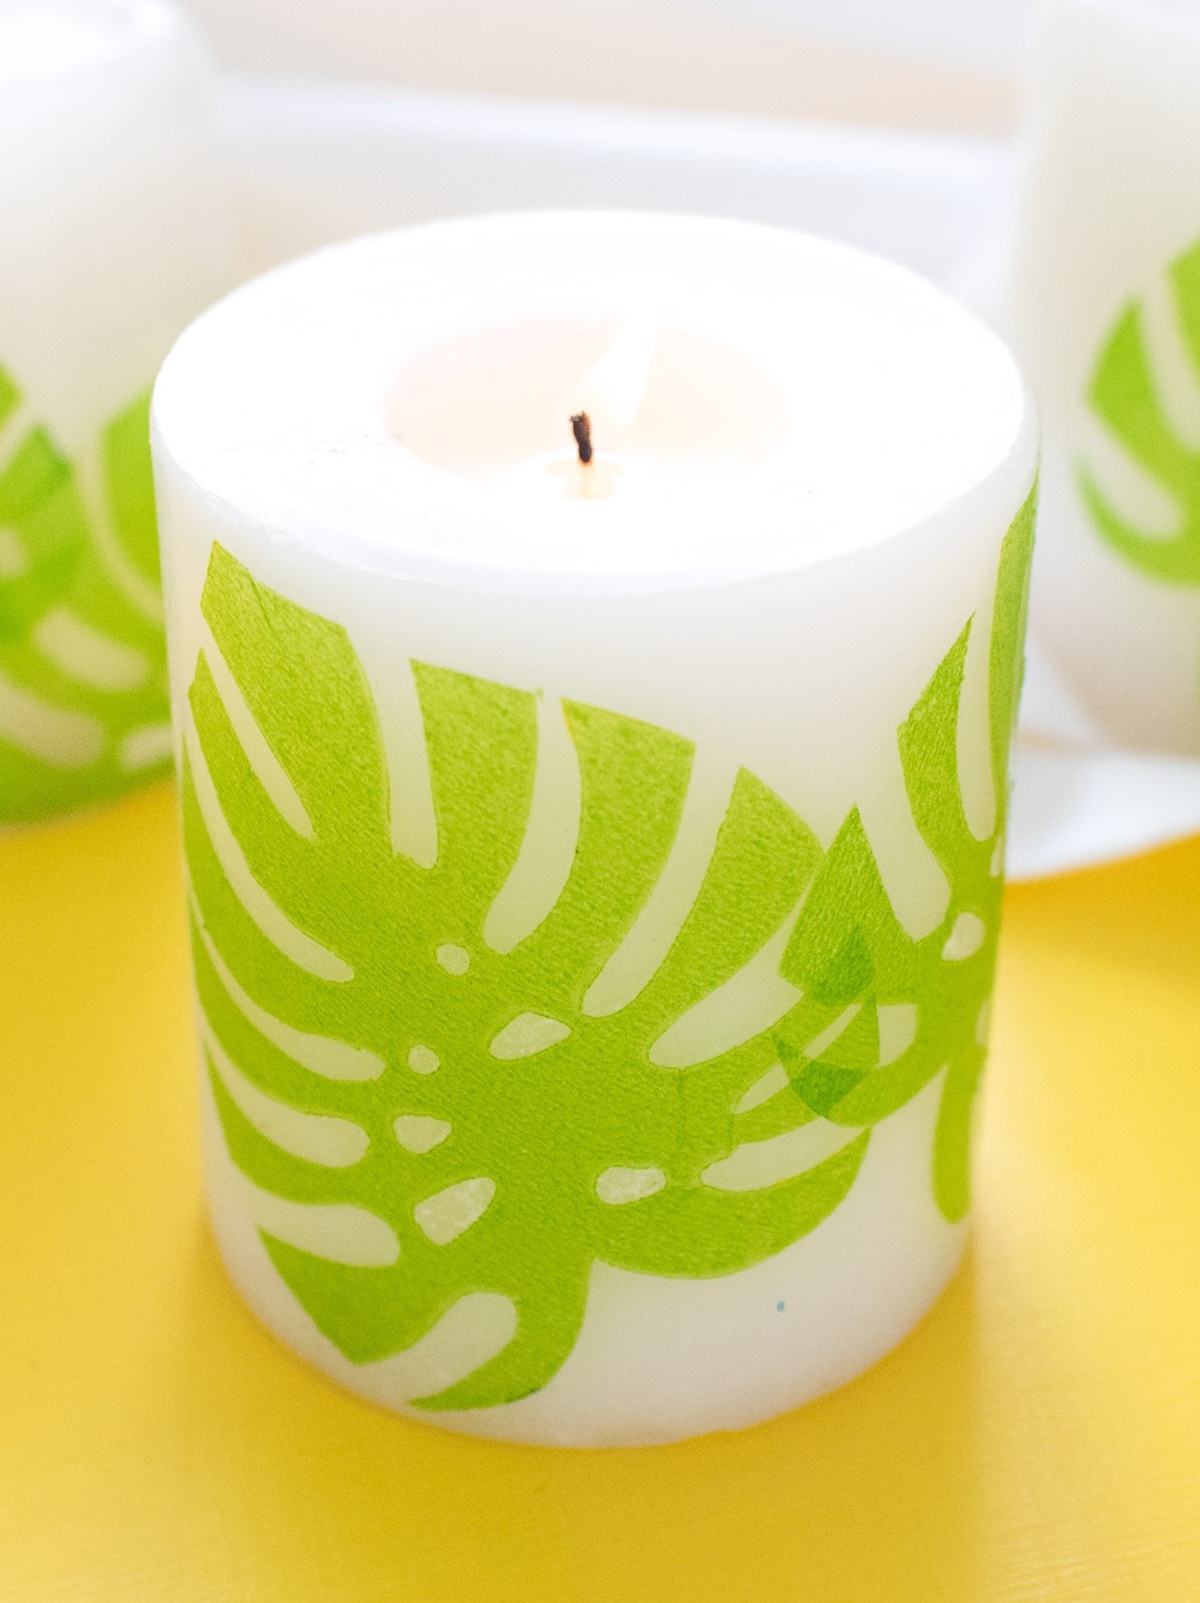 Candles with napkins Mod Podged onto them